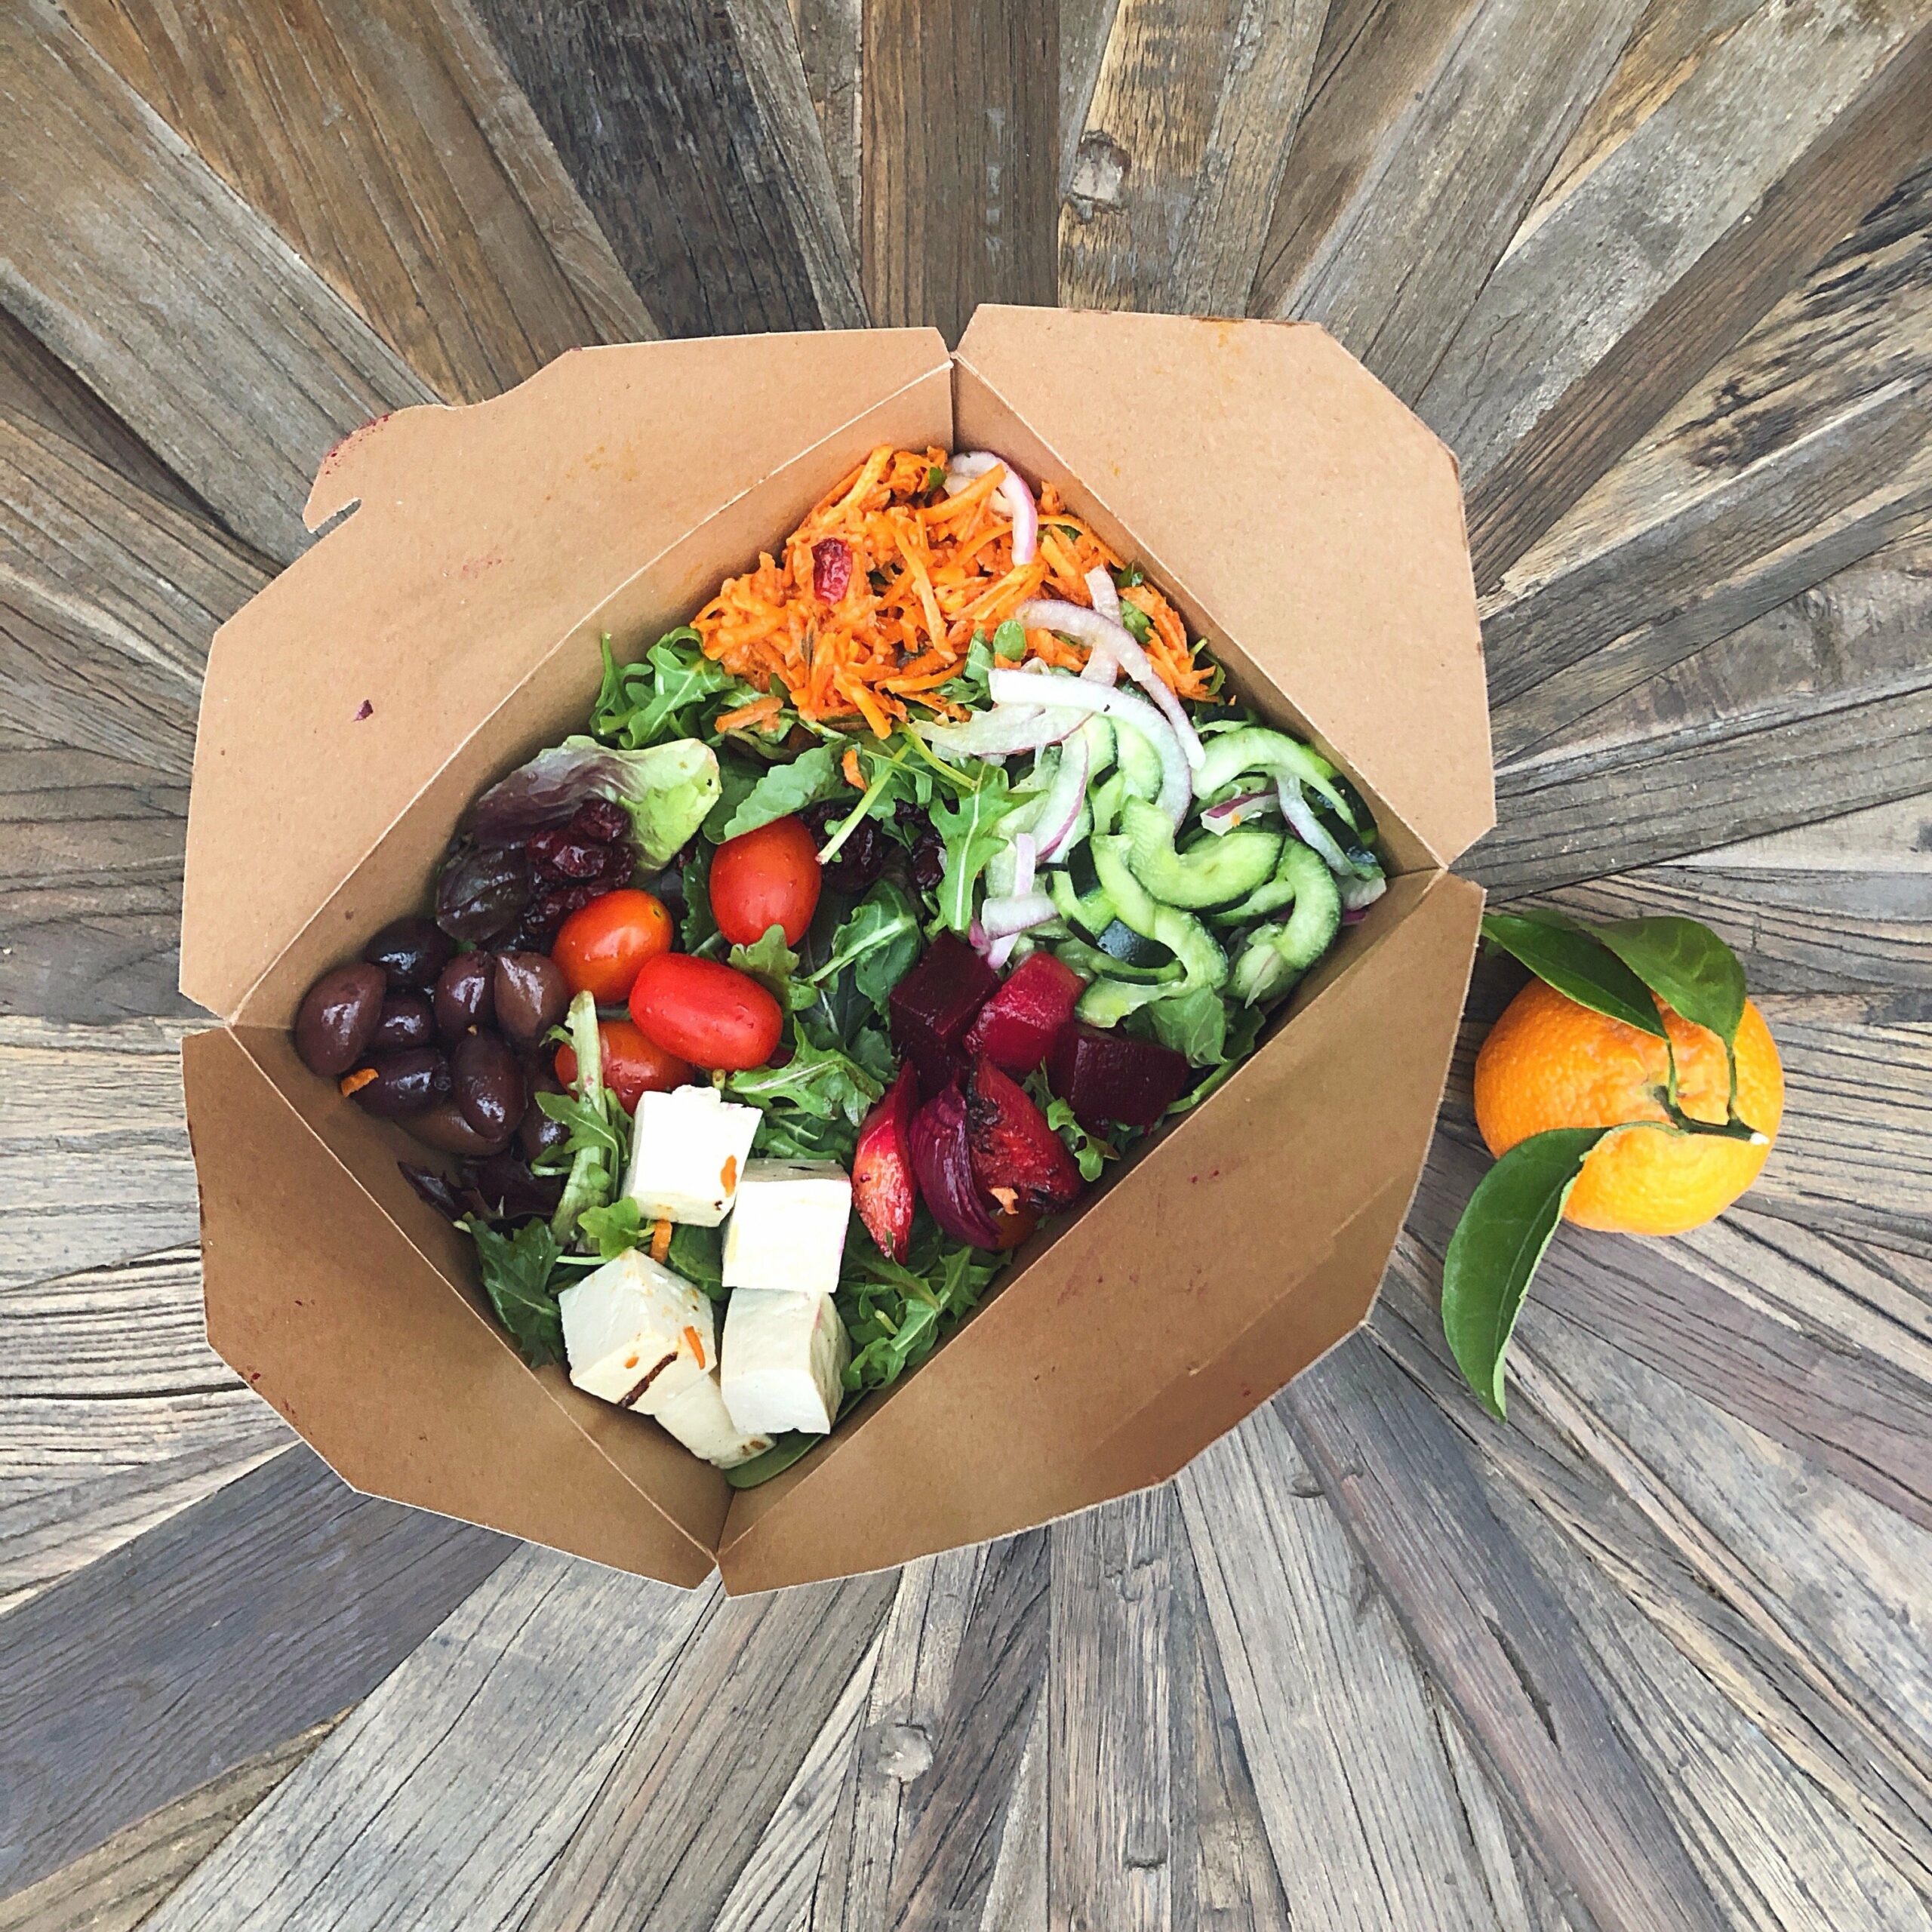 New food delivery startup uses reusable takeout containers